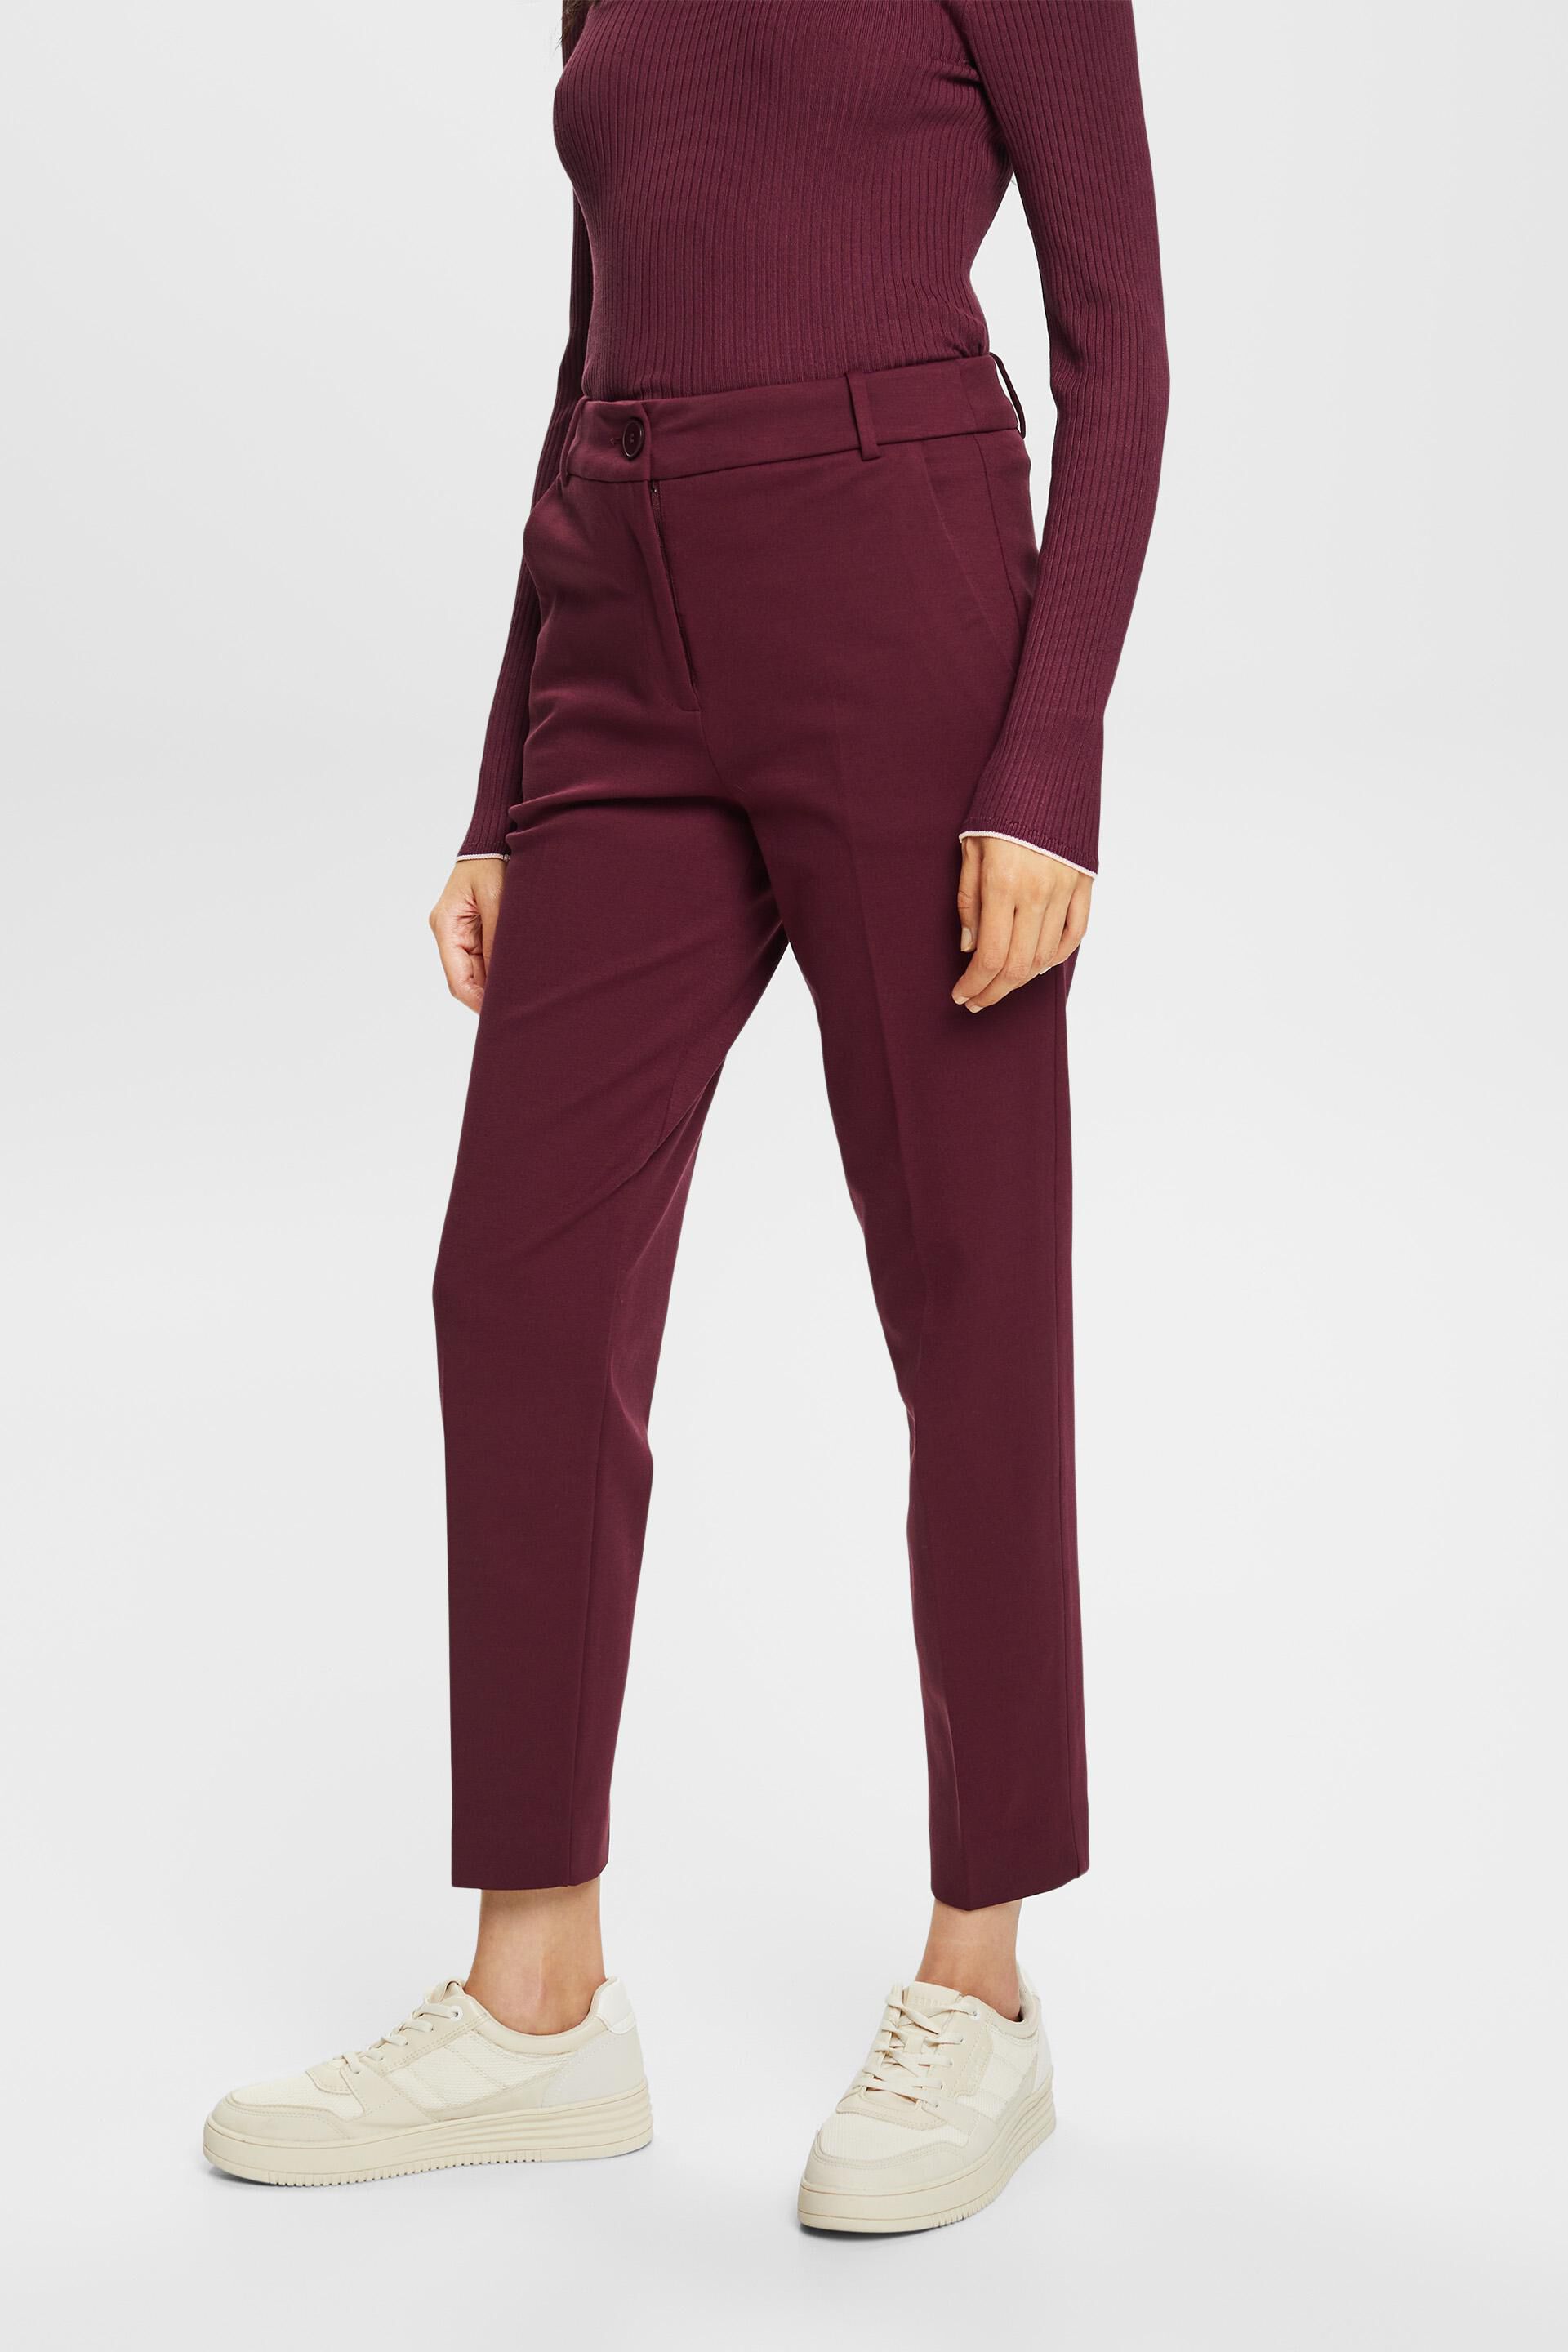 Esprit PUNTO SPORTY tapered & trousers mix match